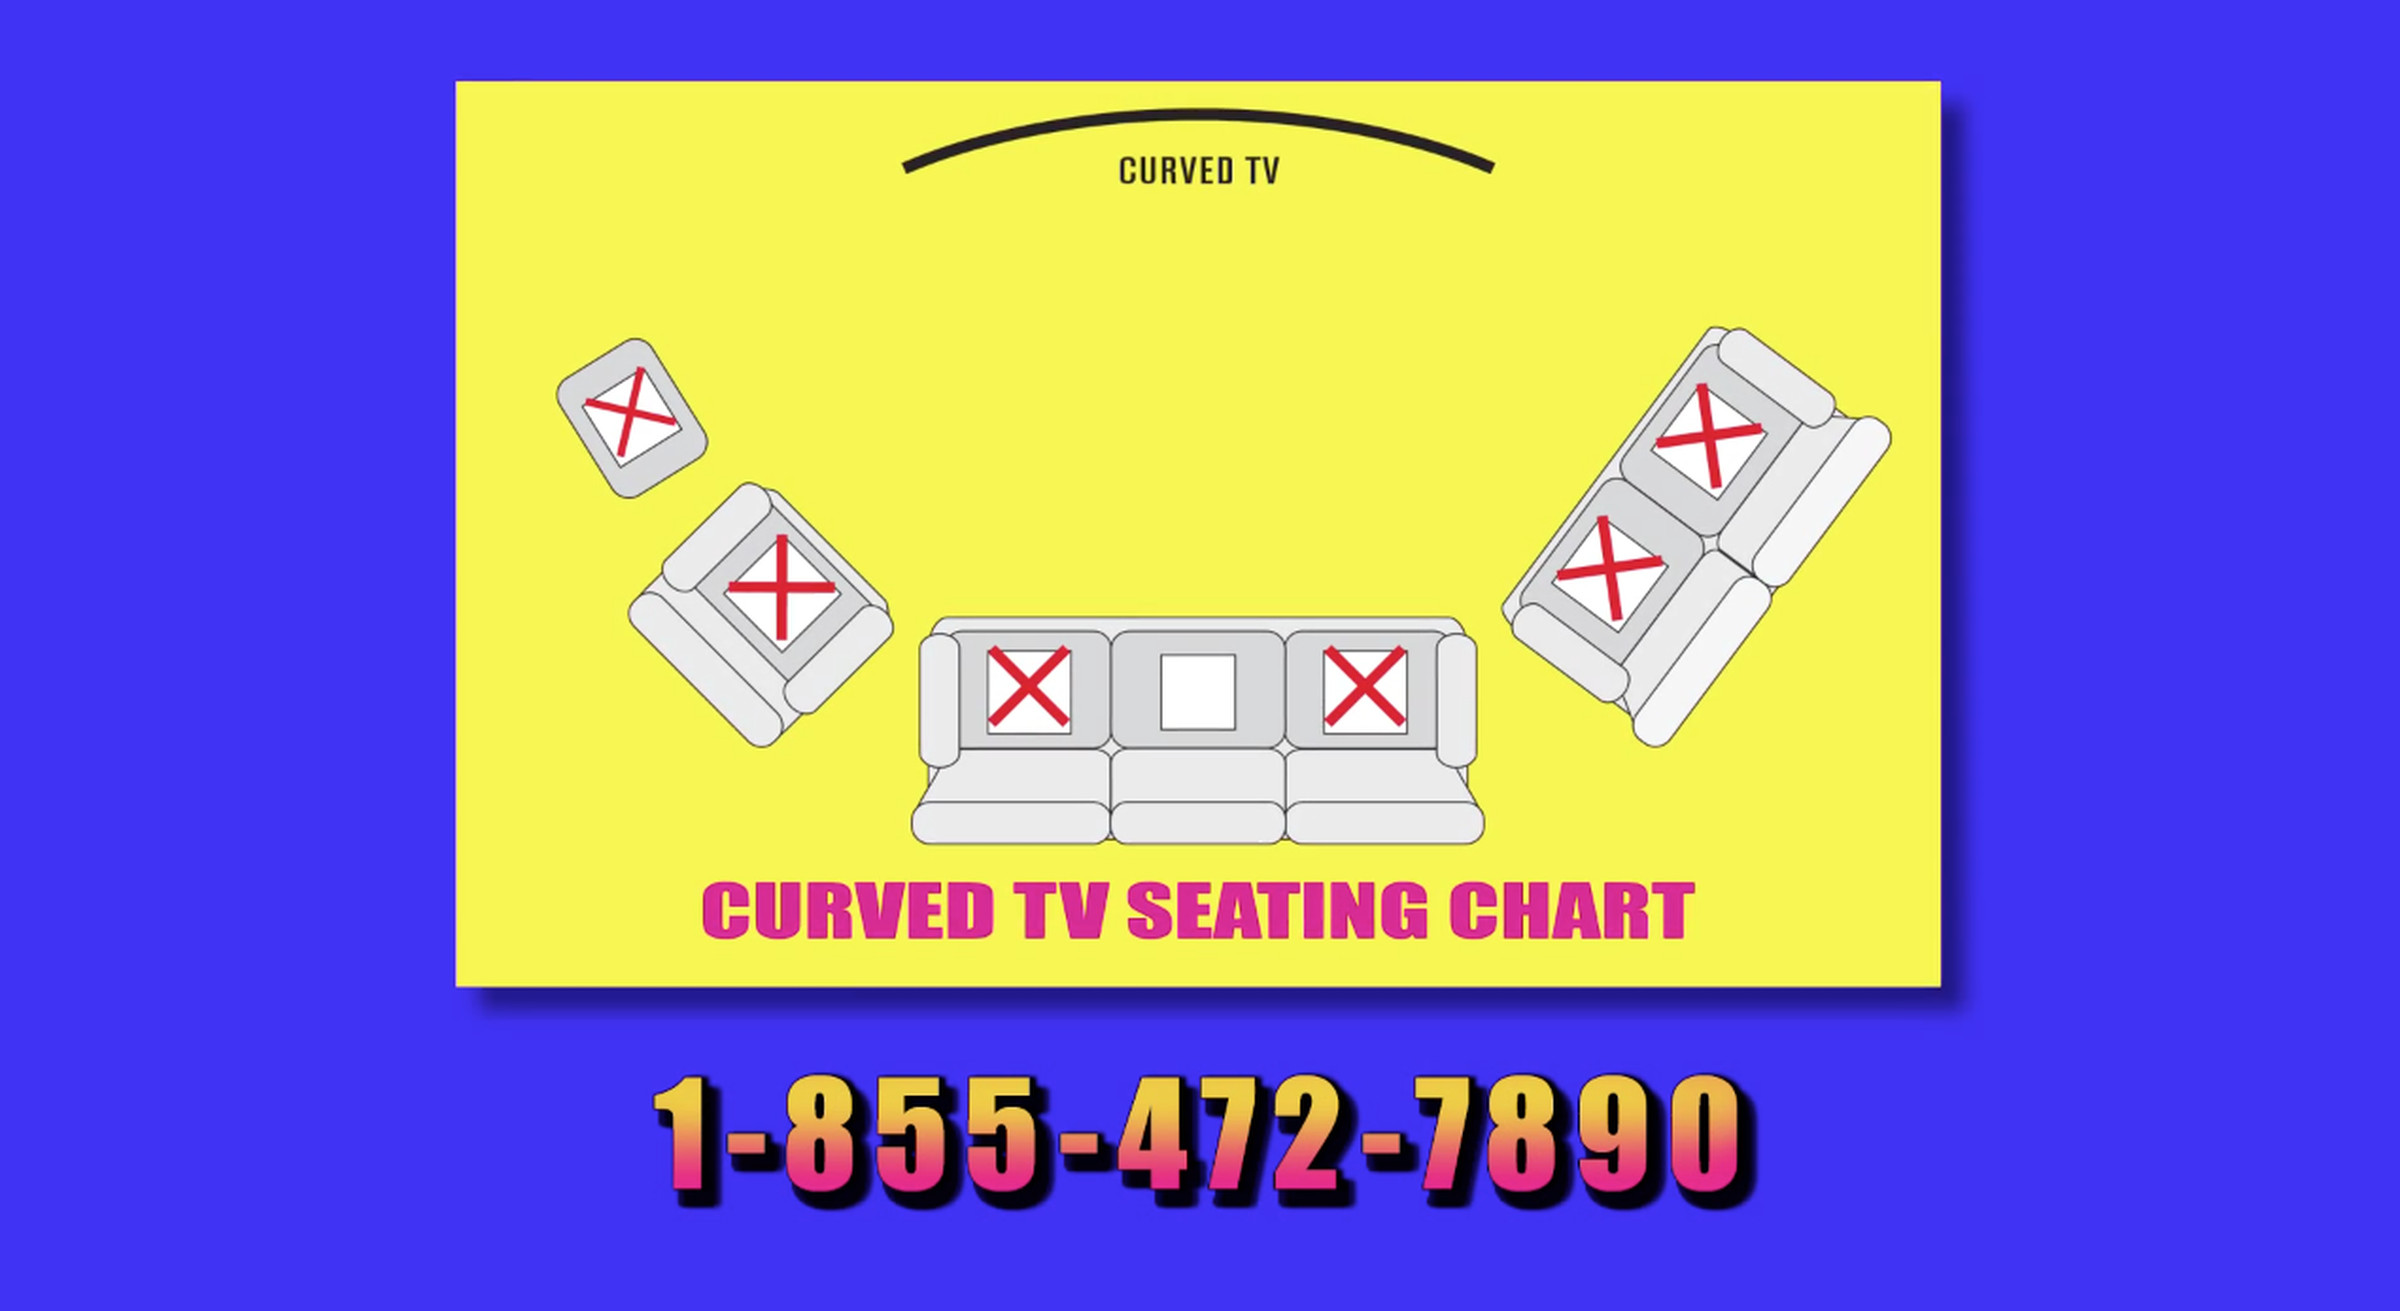 Curved TV seating chart